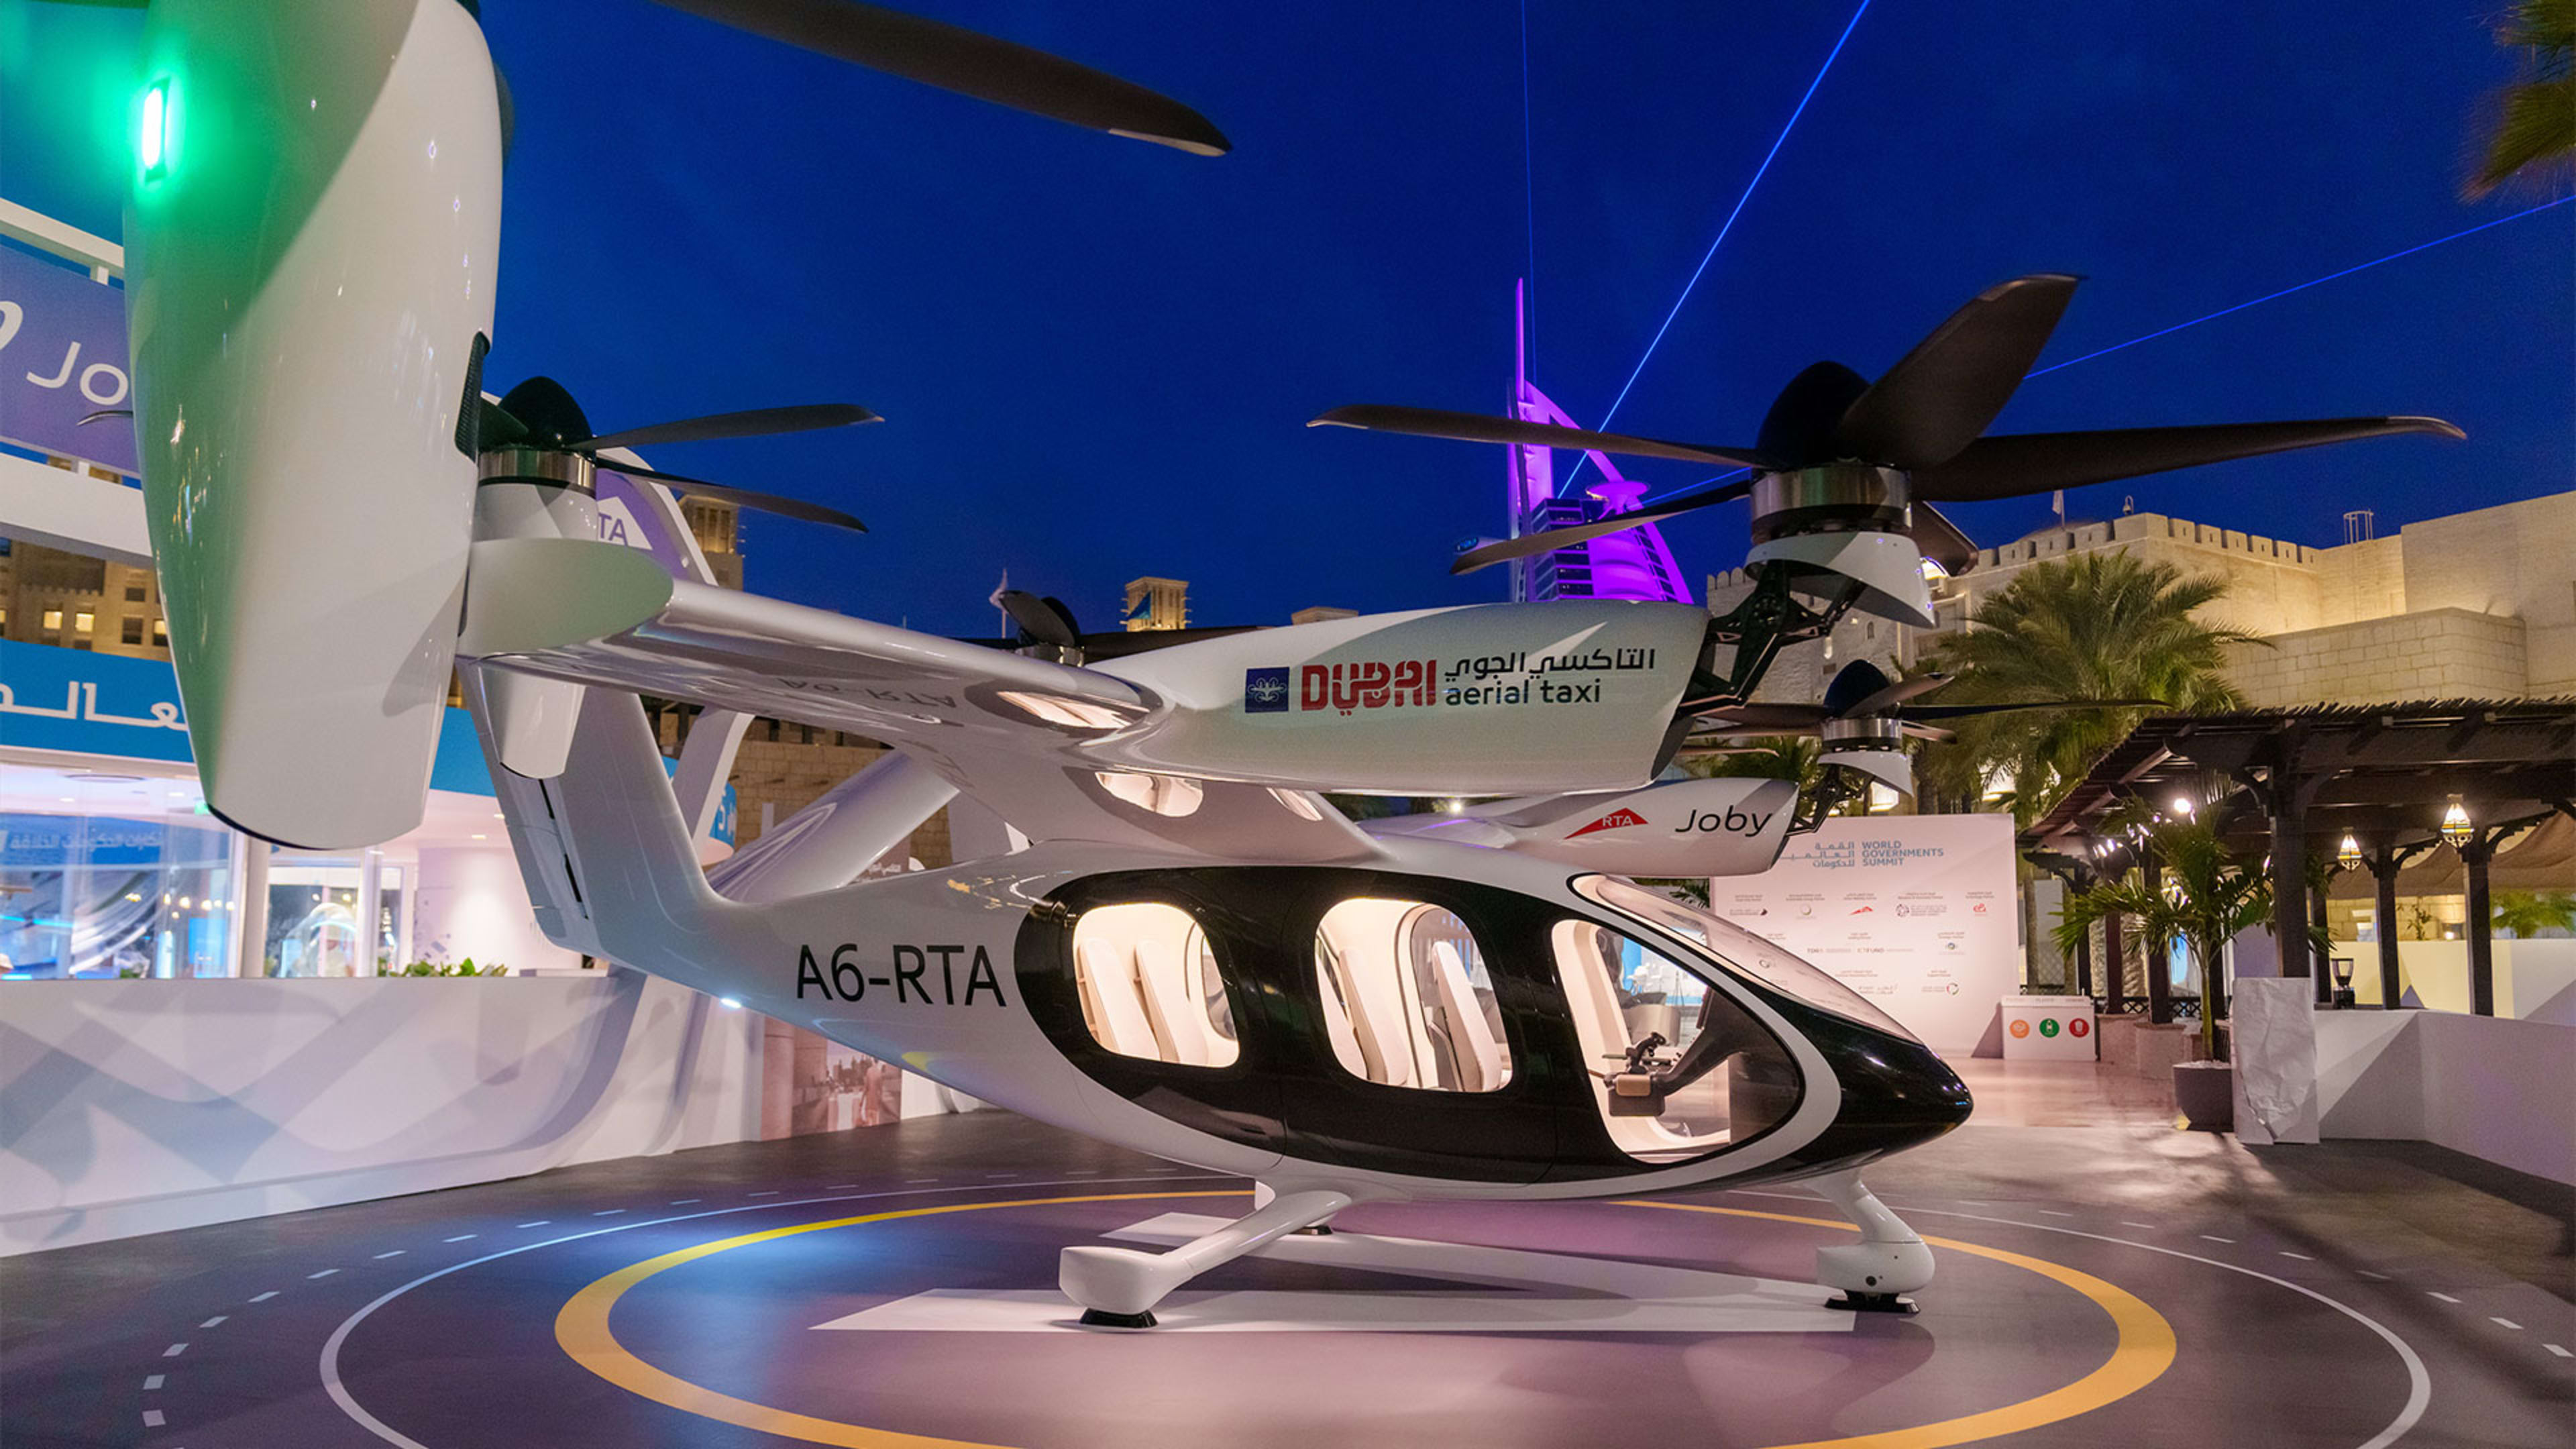 Joby Aviation says it will launch an air-taxi service in Dubai by 2026